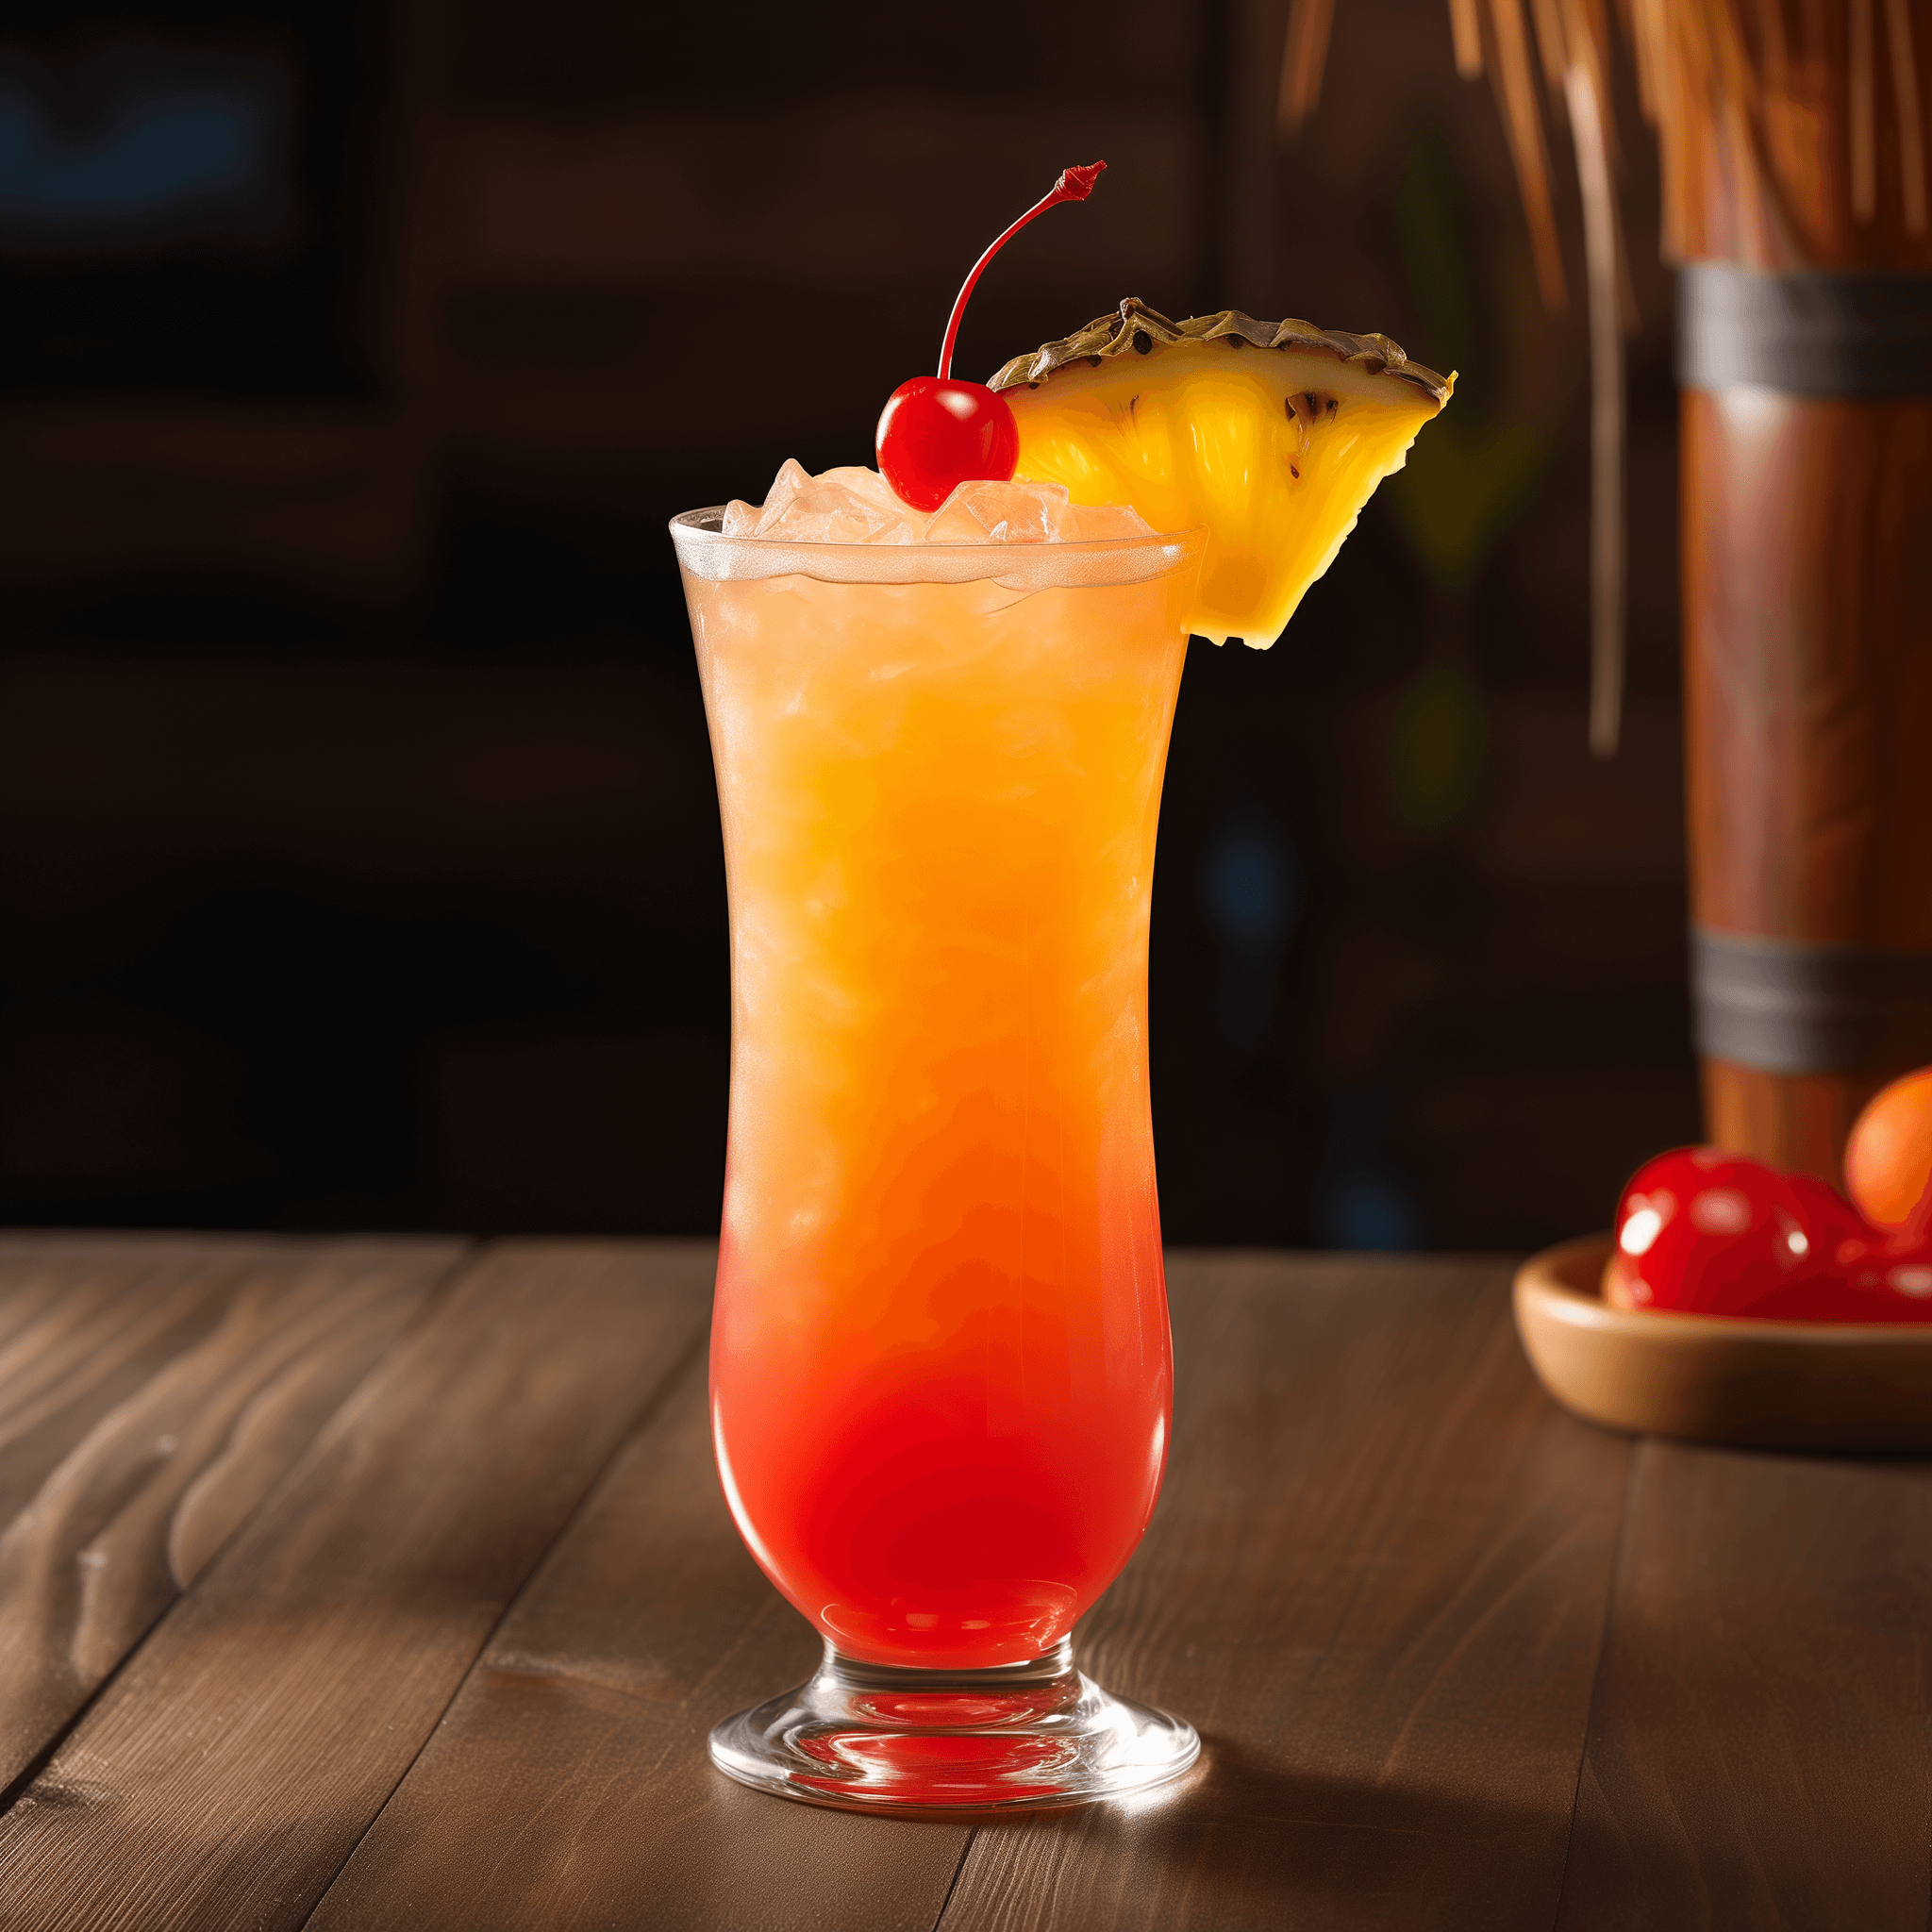 Mambo Cocktail Recipe - The Mambo cocktail is a delightful mix of sweet, tangy, and refreshing flavors. The combination of pineapple, orange, and lime juices creates a bright, citrusy base, while the rum adds a smooth, warming touch. The grenadine provides a hint of sweetness and a beautiful color, making this cocktail a true sensory experience.